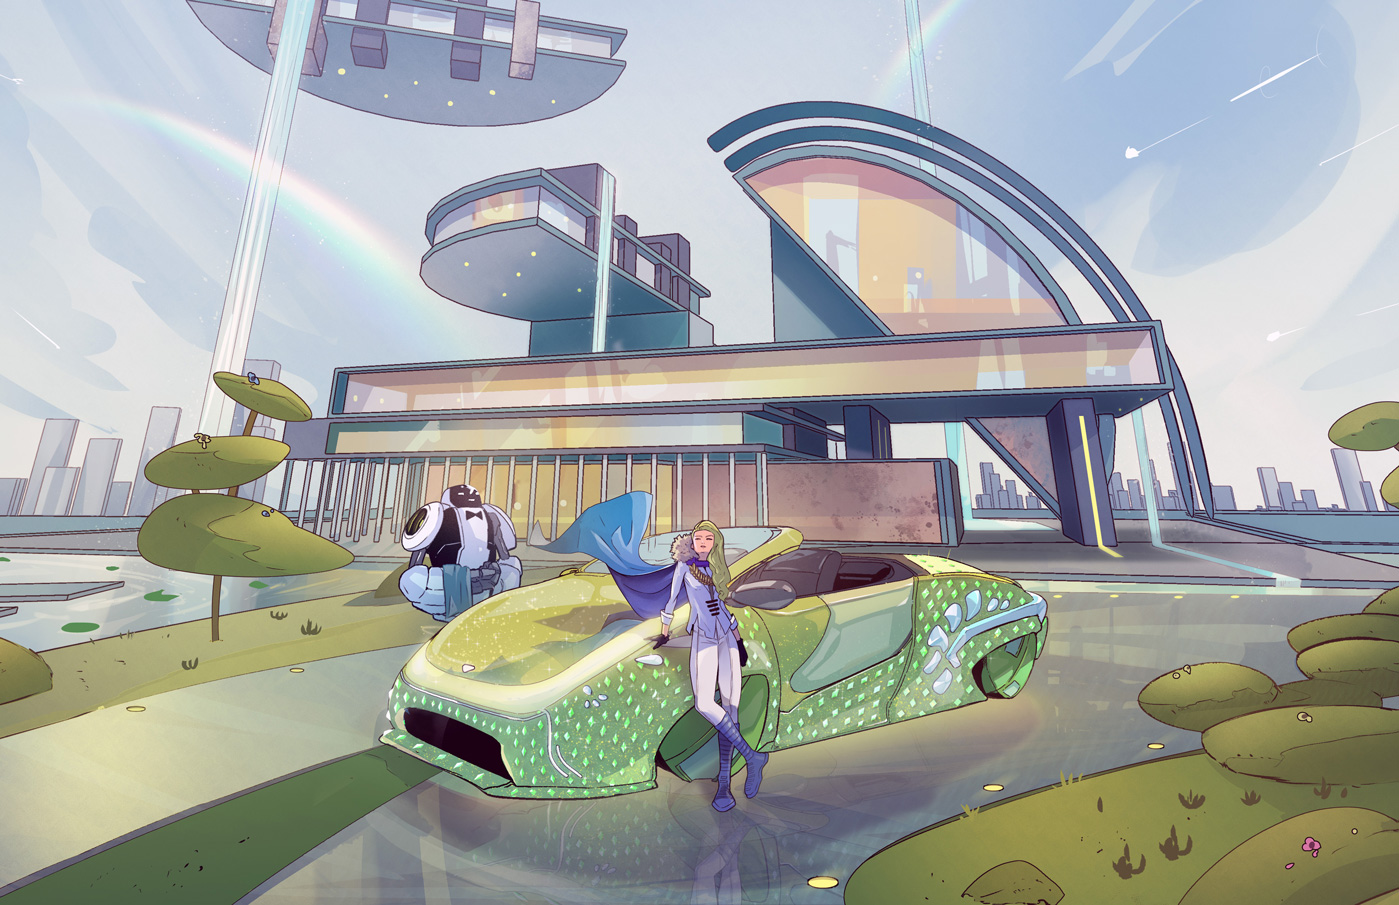 Aspen Colby poses beside diamond-covered car and Baxter, her robot butler, in front of her super-mansion. Her cape flows across the hood.